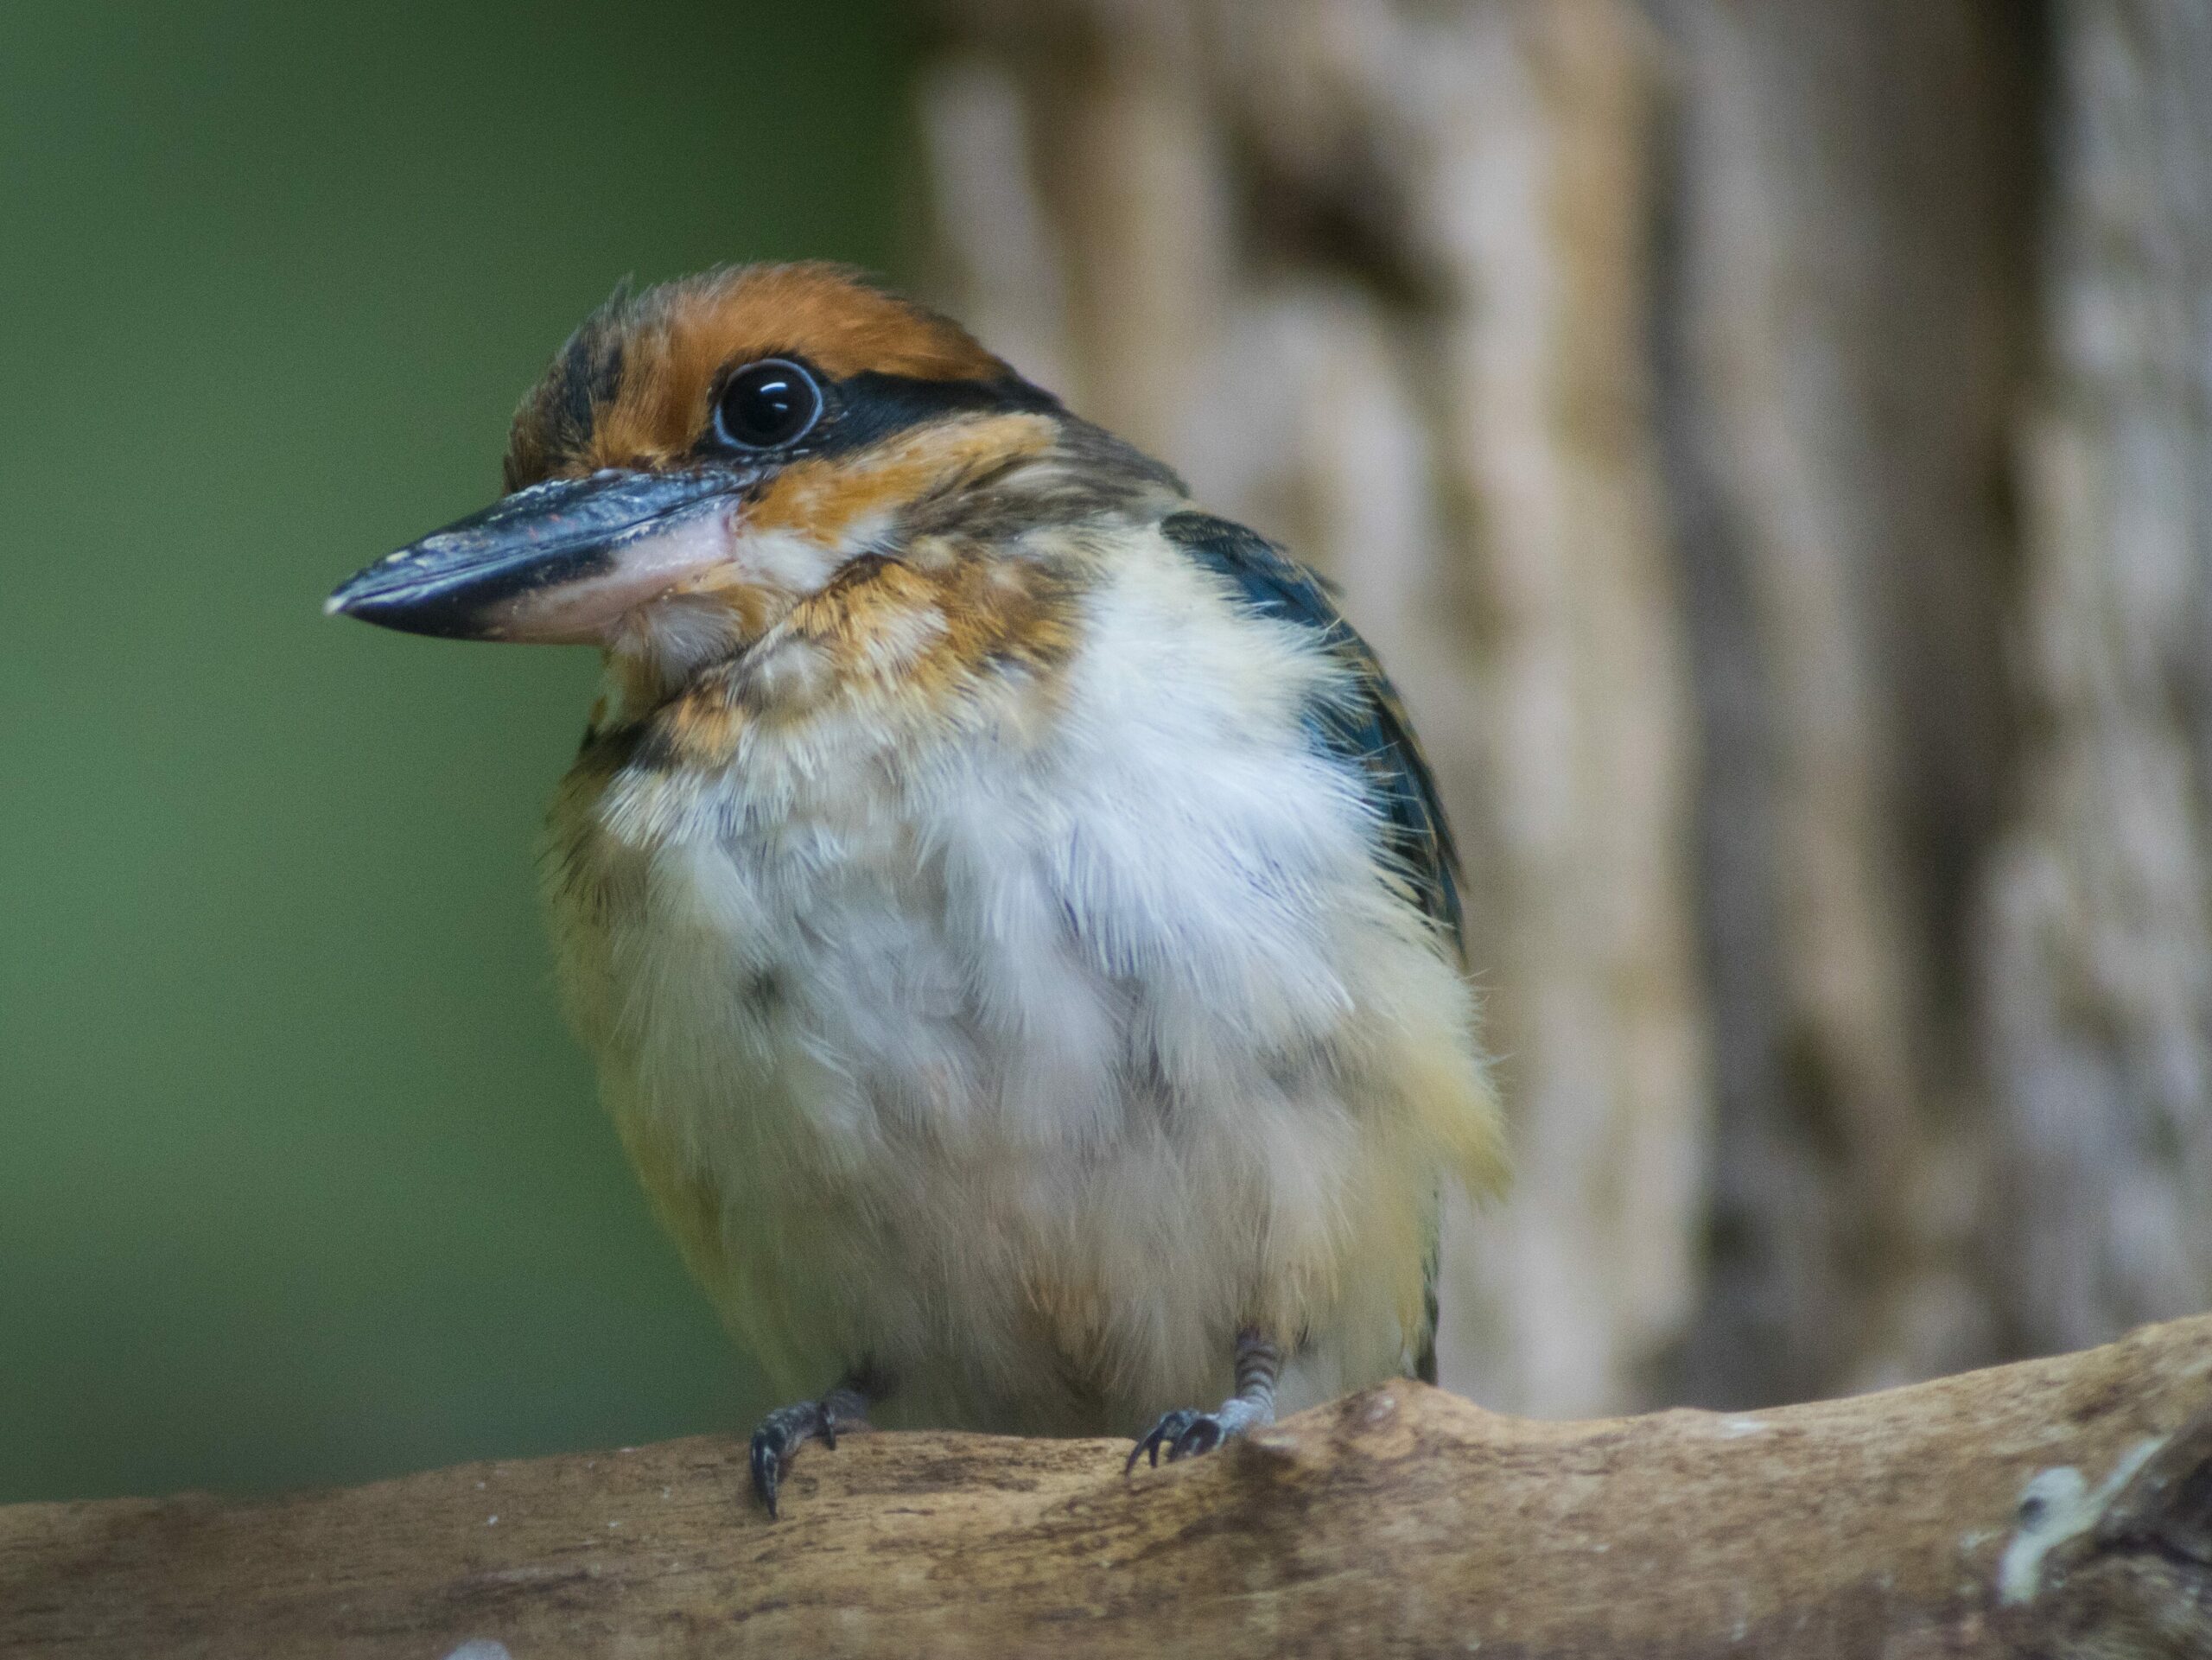 Female Guam Kingfisher perched on a branch